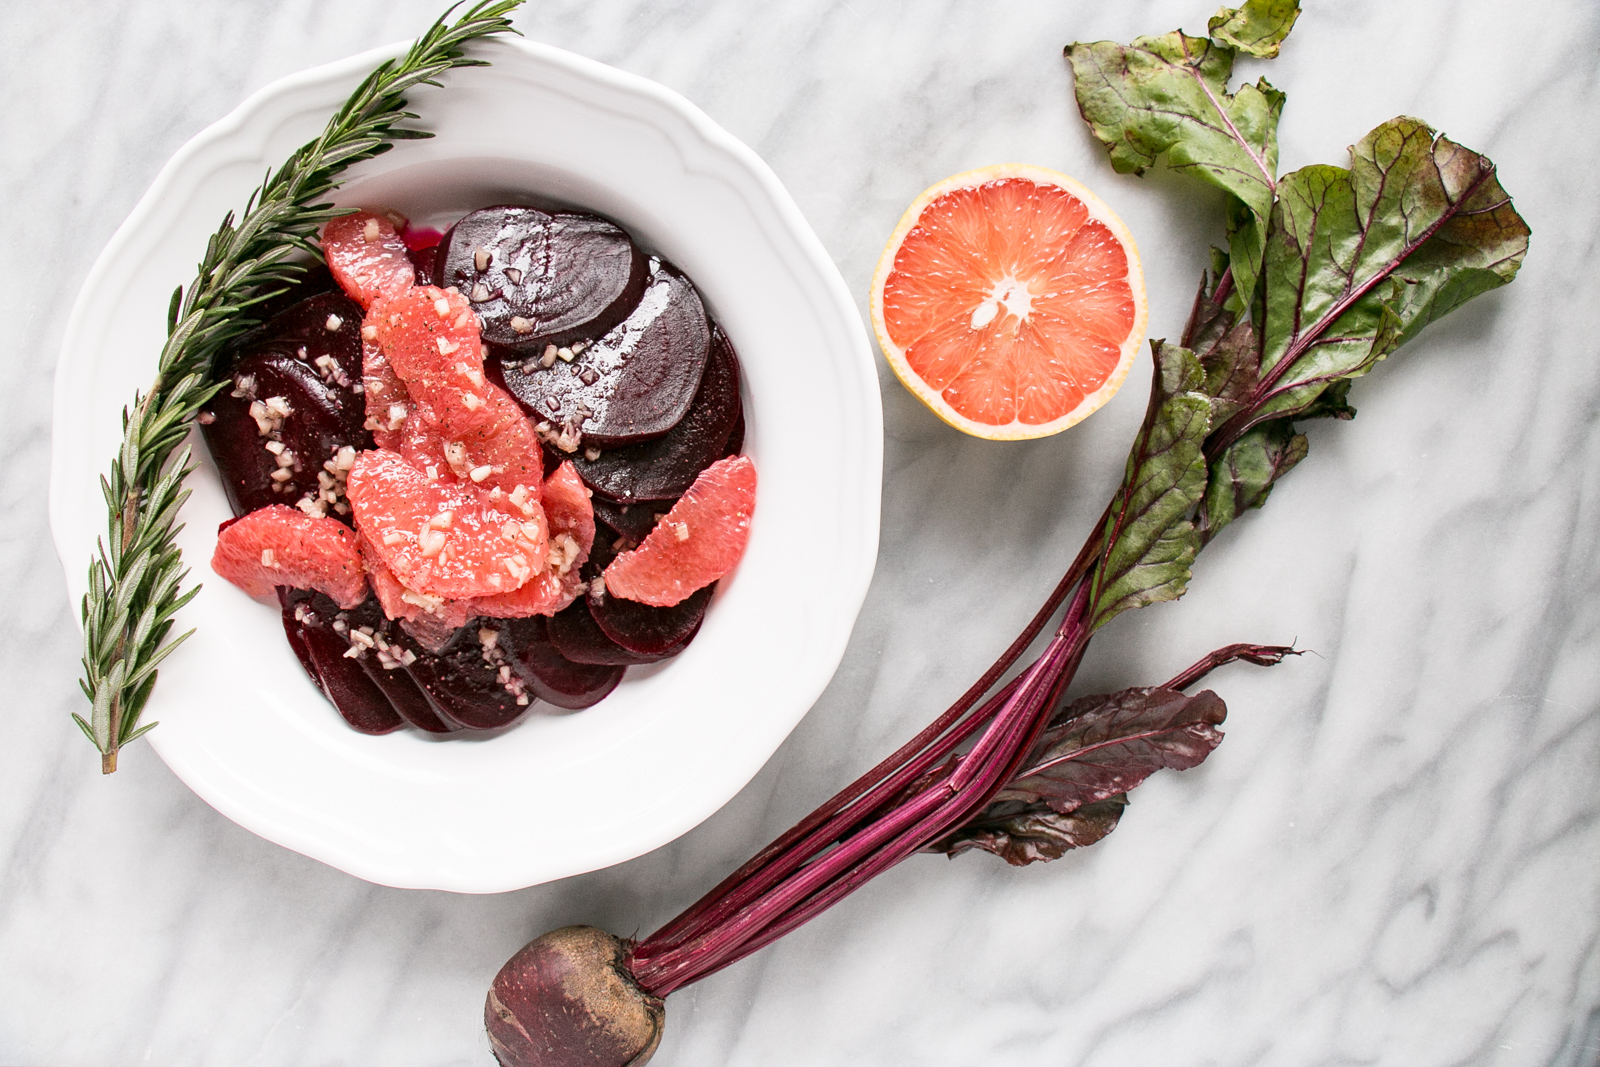 Rosemary Beet and Grapefruit Salad with a Shallot Vinaigrette is a great makes ahead winter salad! #salad #beets